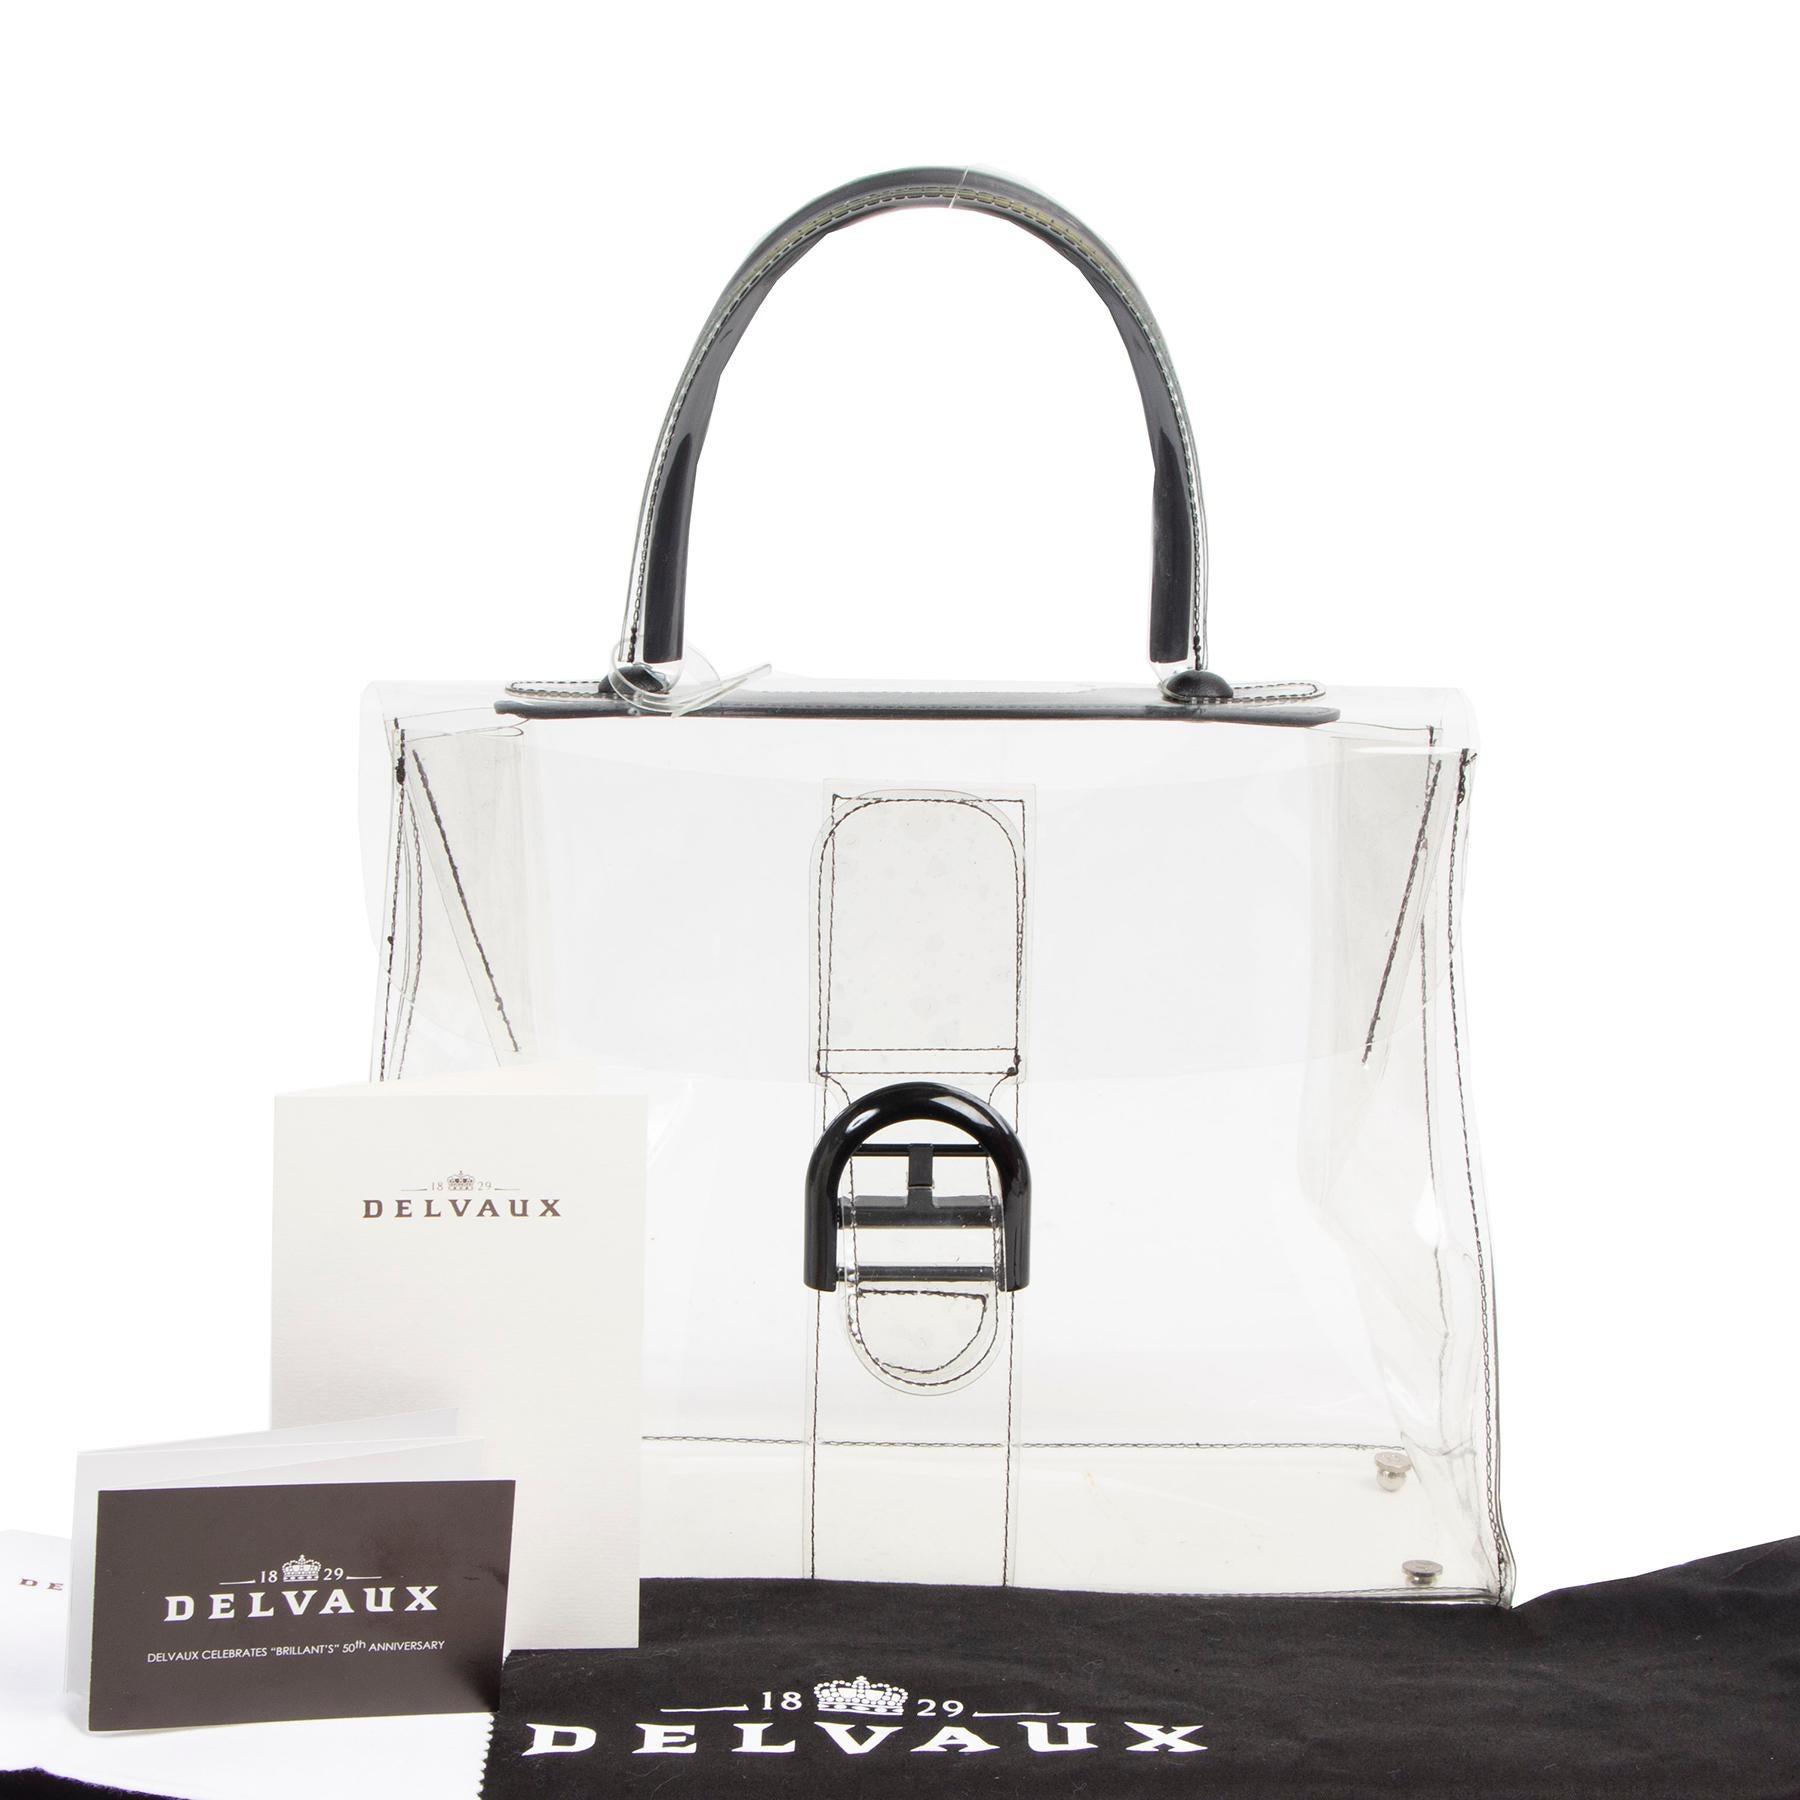 Very good condition 

Delvaux Brillant Noces D'or

To celebrate Delvaux Brillant's 50th birthday, Delvaux Brillant Noces D'or was launched to mark the occasion in 2008. Without detracting from its timeless appeal, this limited edition bag got a